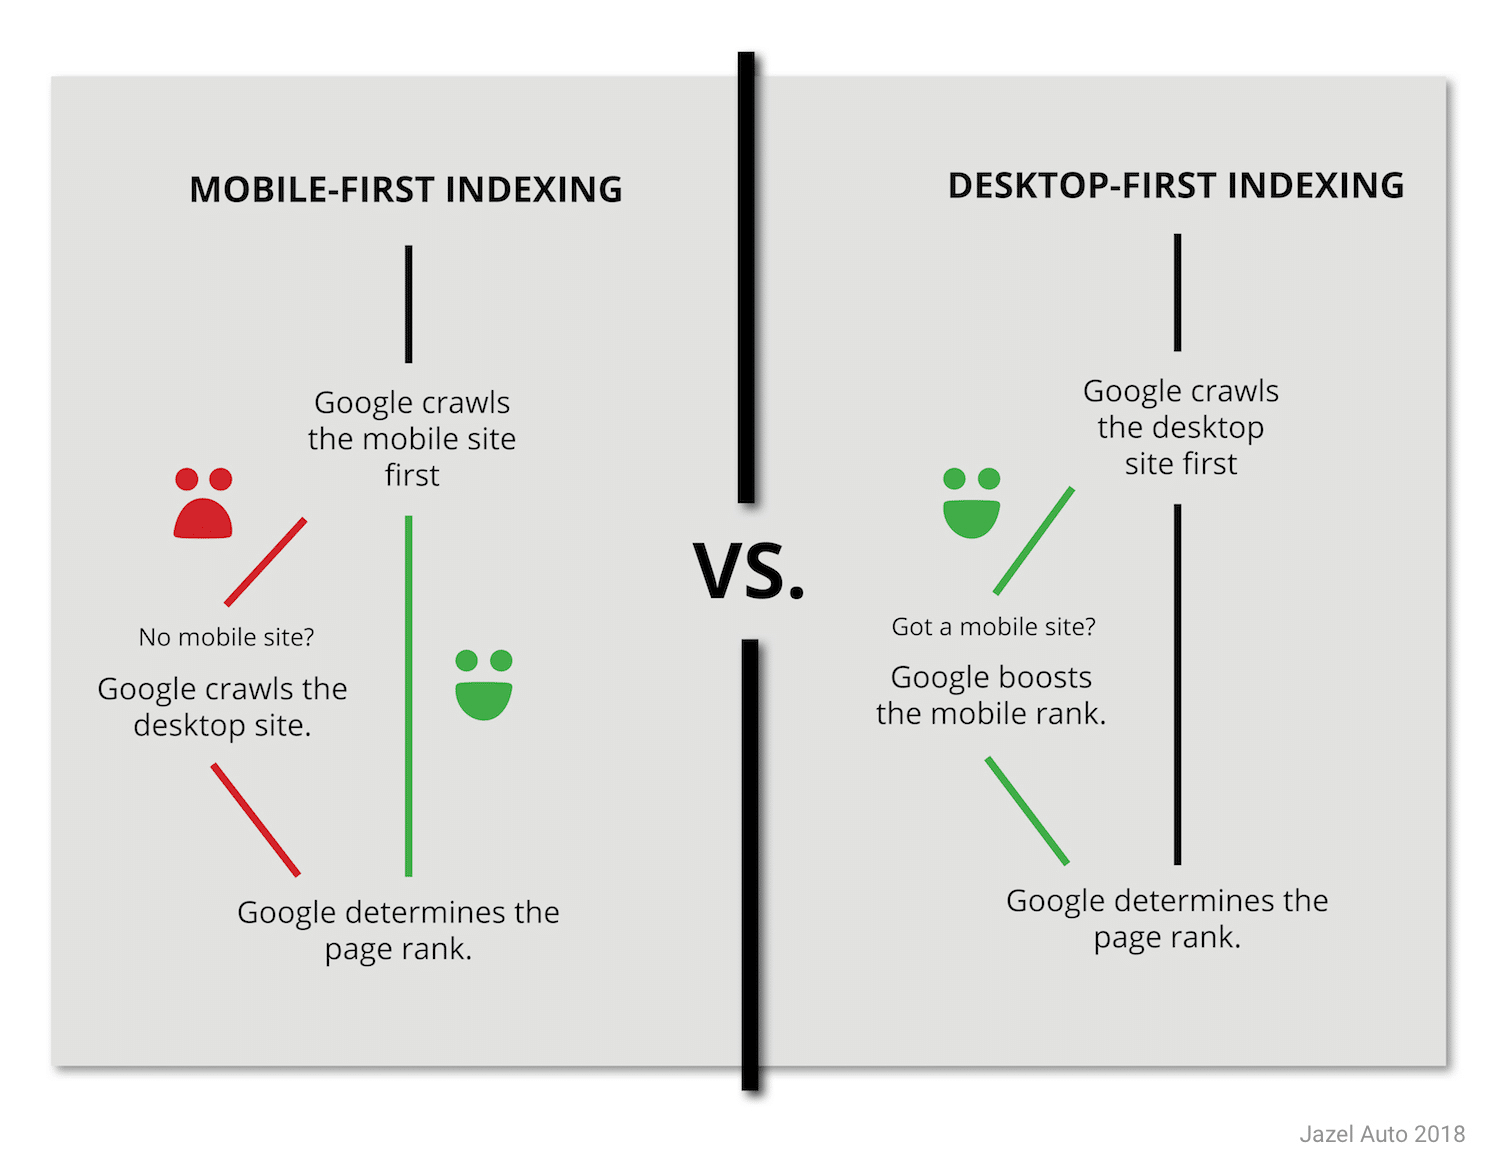 A graphic showing how mobile-first indexing works